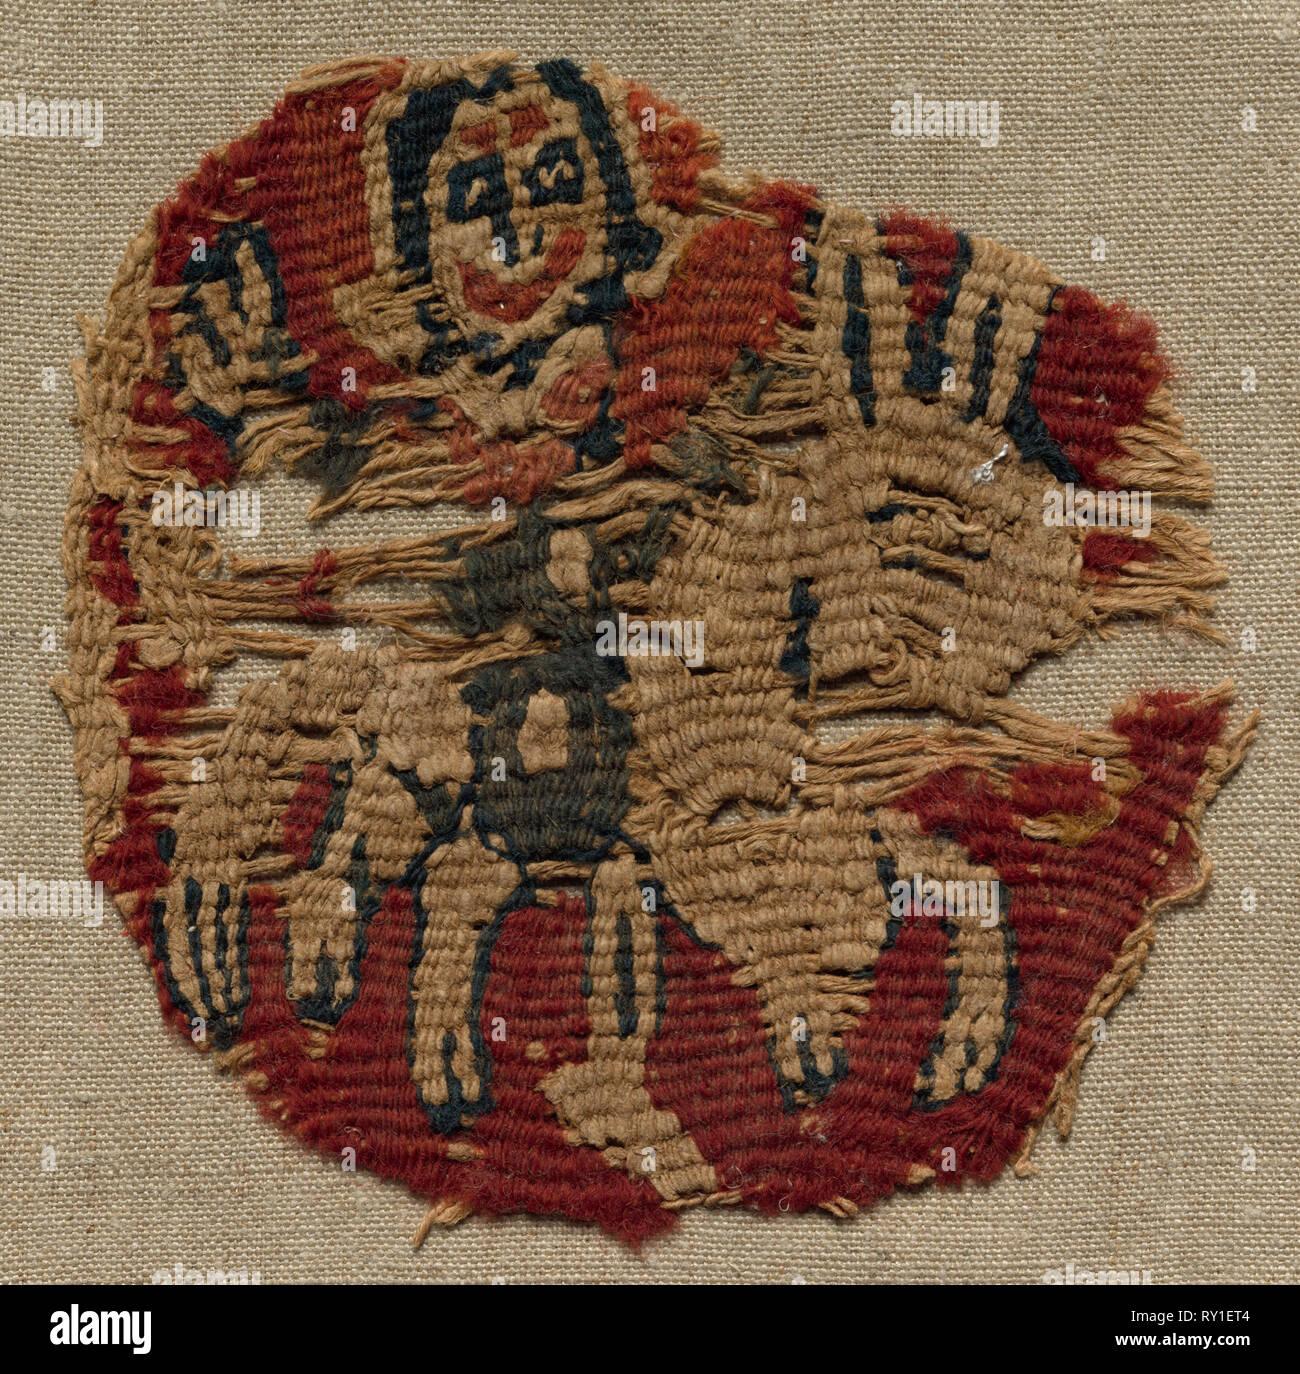 Fragment, Part of an Ornament from a Garment, 800-850. Egypt, late Abbasid period, first half of 9th century. Tapestry weave; wool and linen; overall: 10.5 x 10.7 cm (4 1/8 x 4 3/16 in Stock Photo